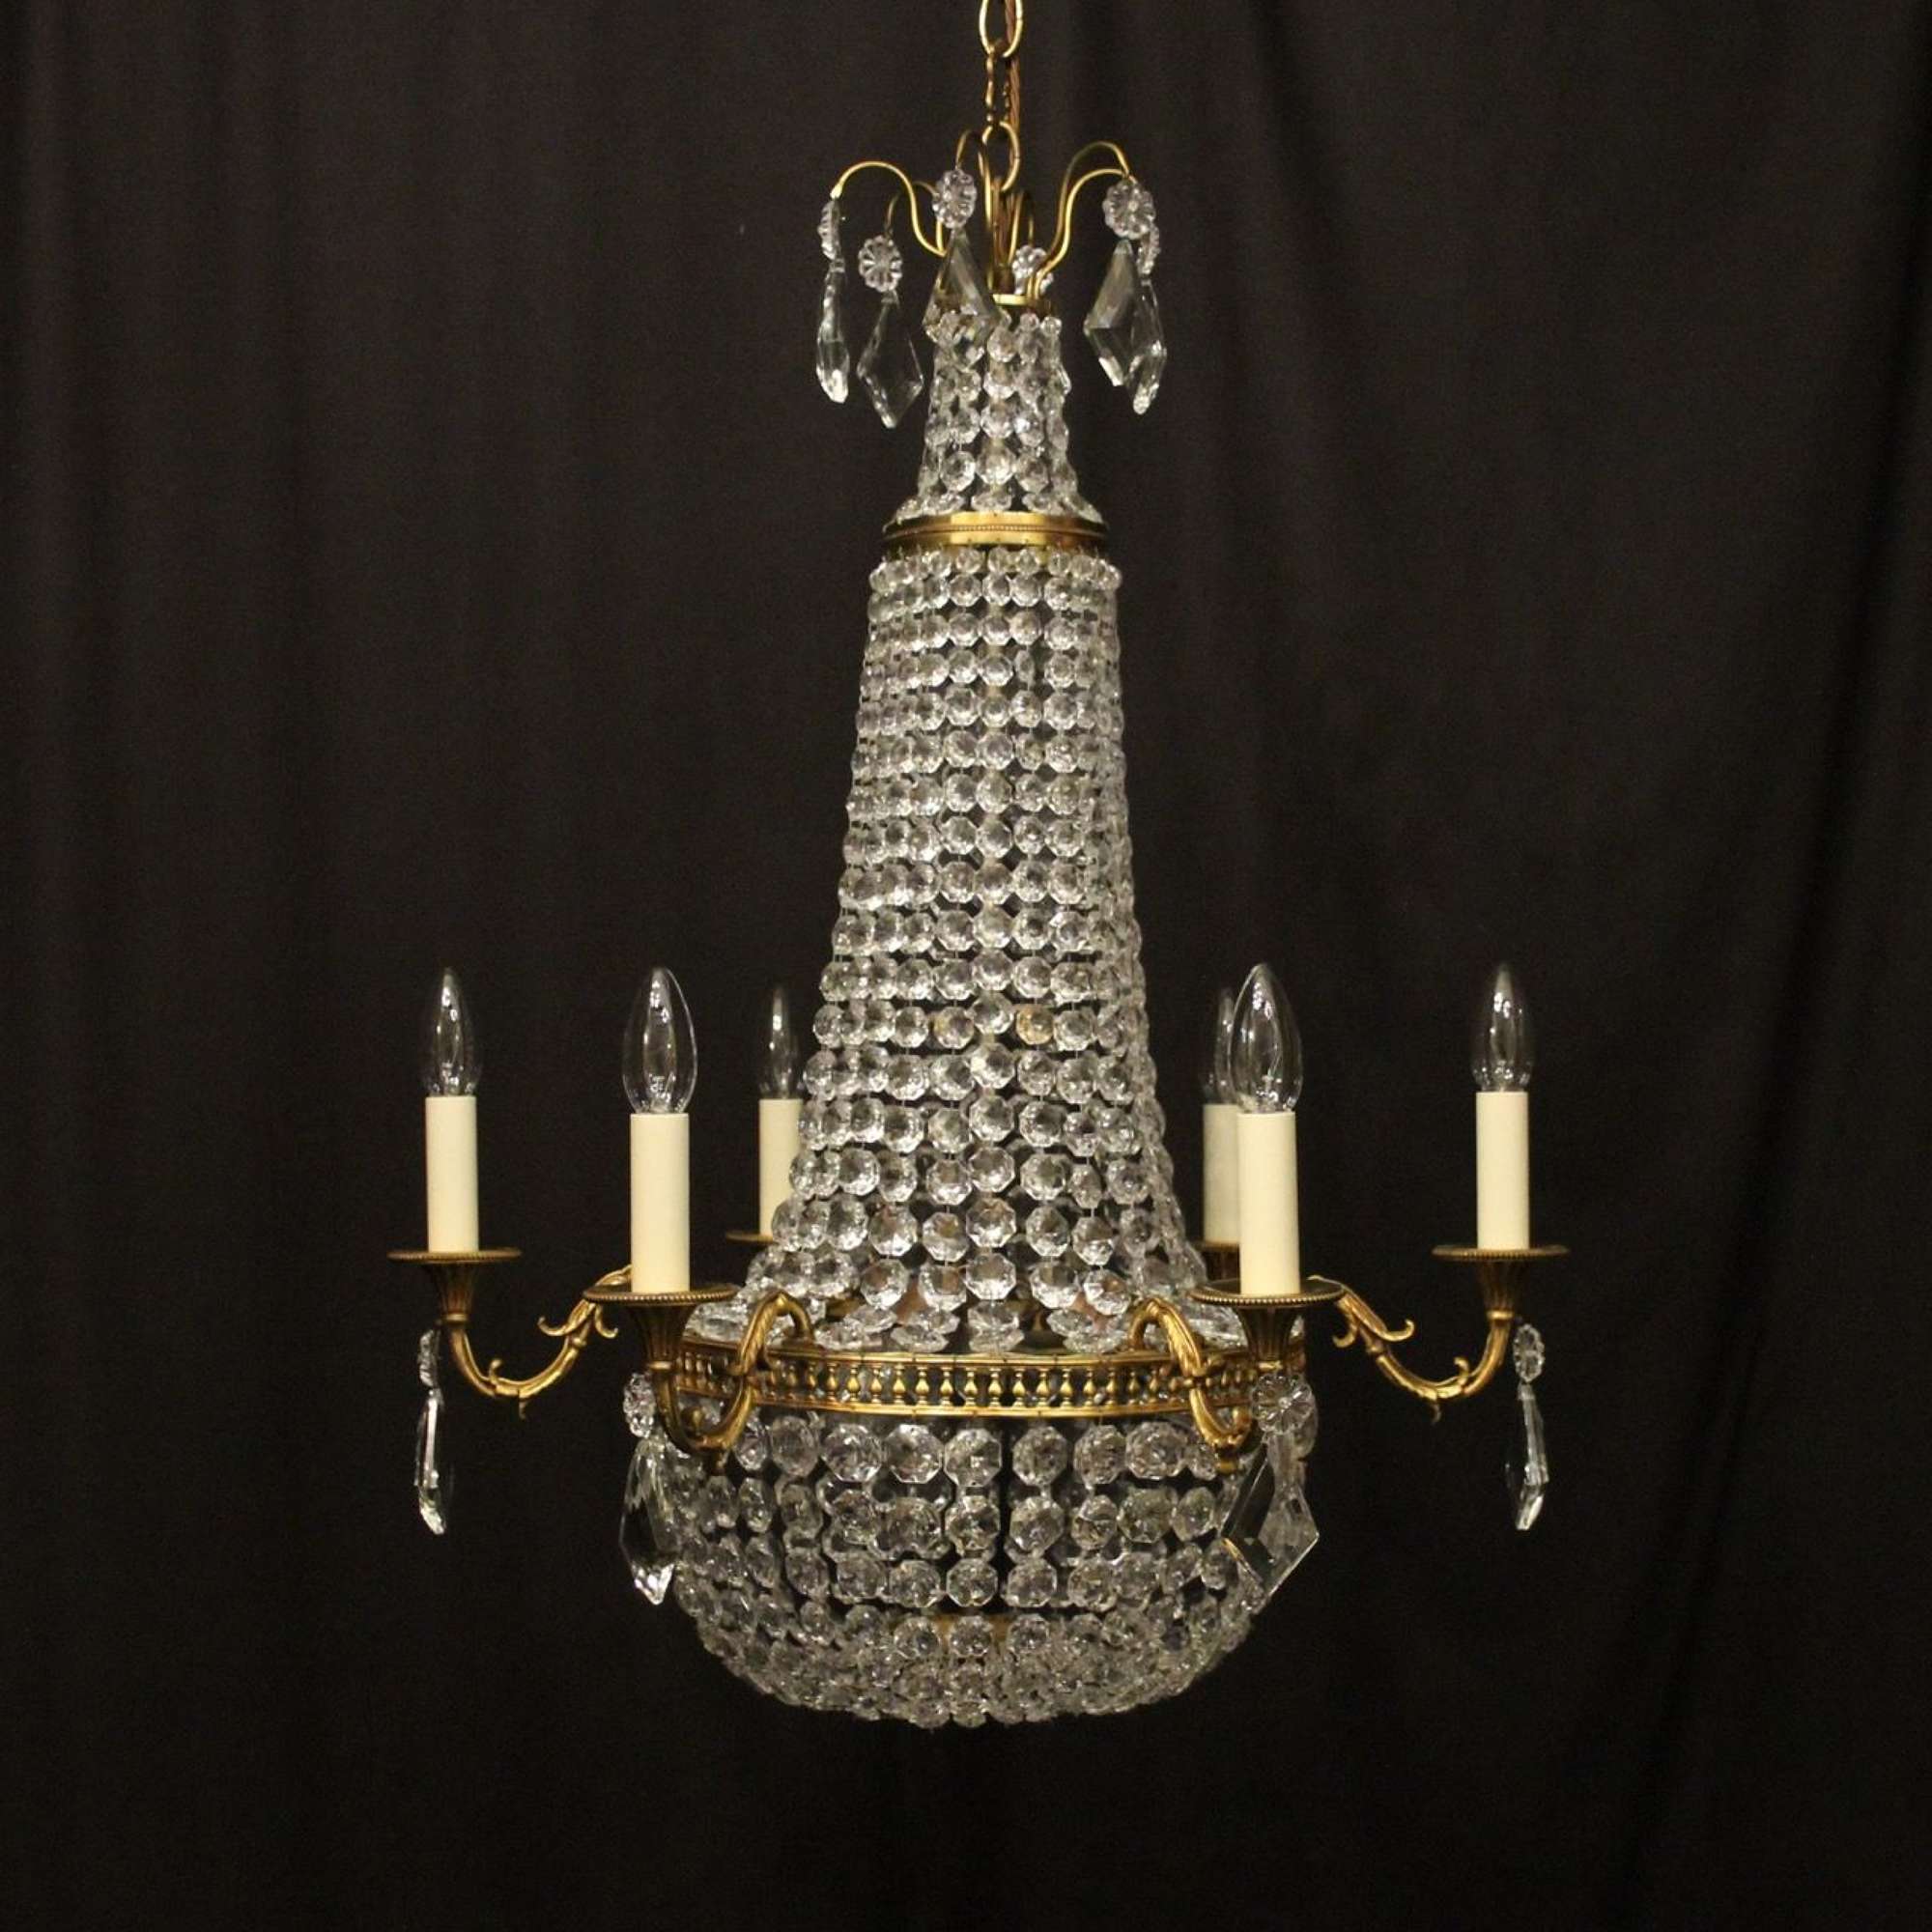 French Gilded 9 Light Tent & Waterfall Chandelier